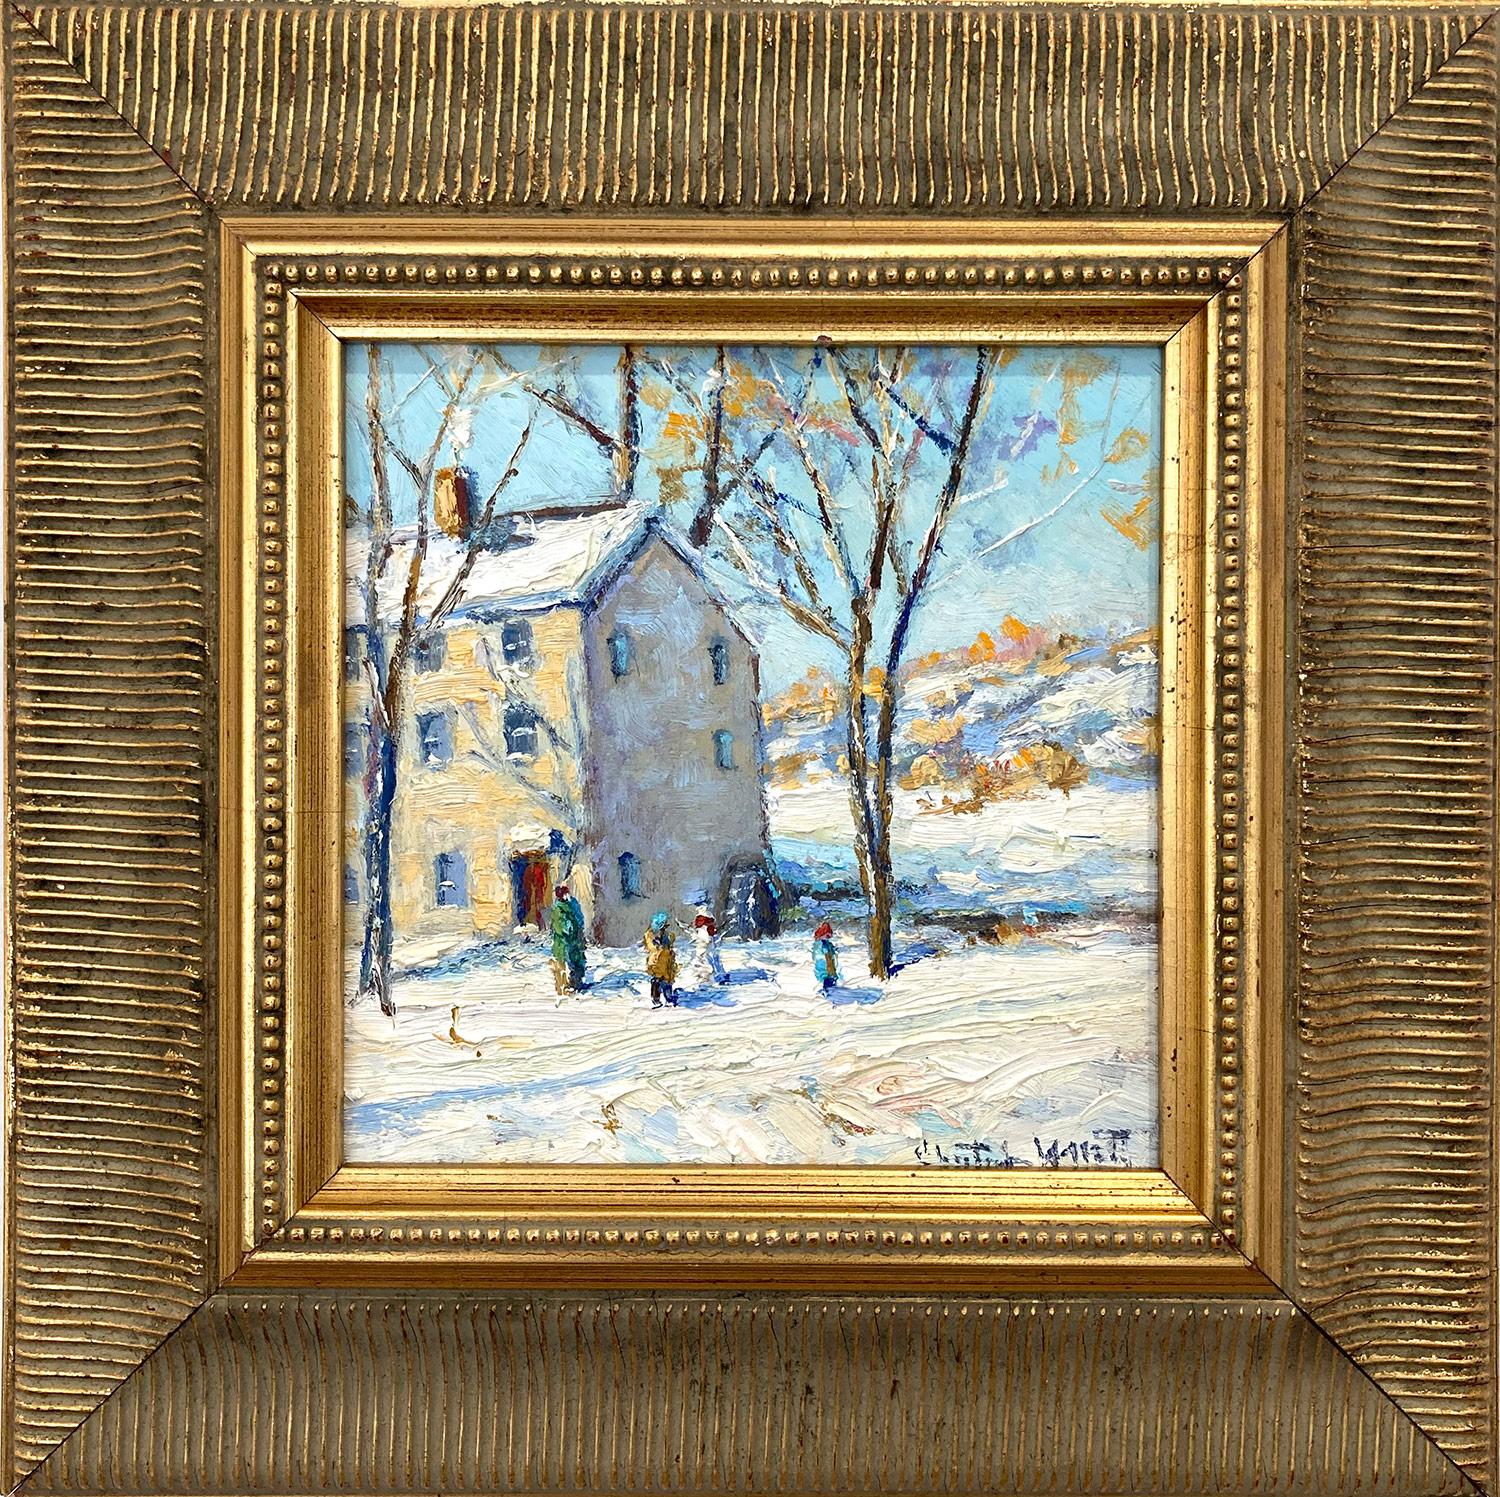 Christopher Willett Figurative Painting - "Weekend With Grandmom" Bucks County Snow Scene Landscape Oil Painting on Panel